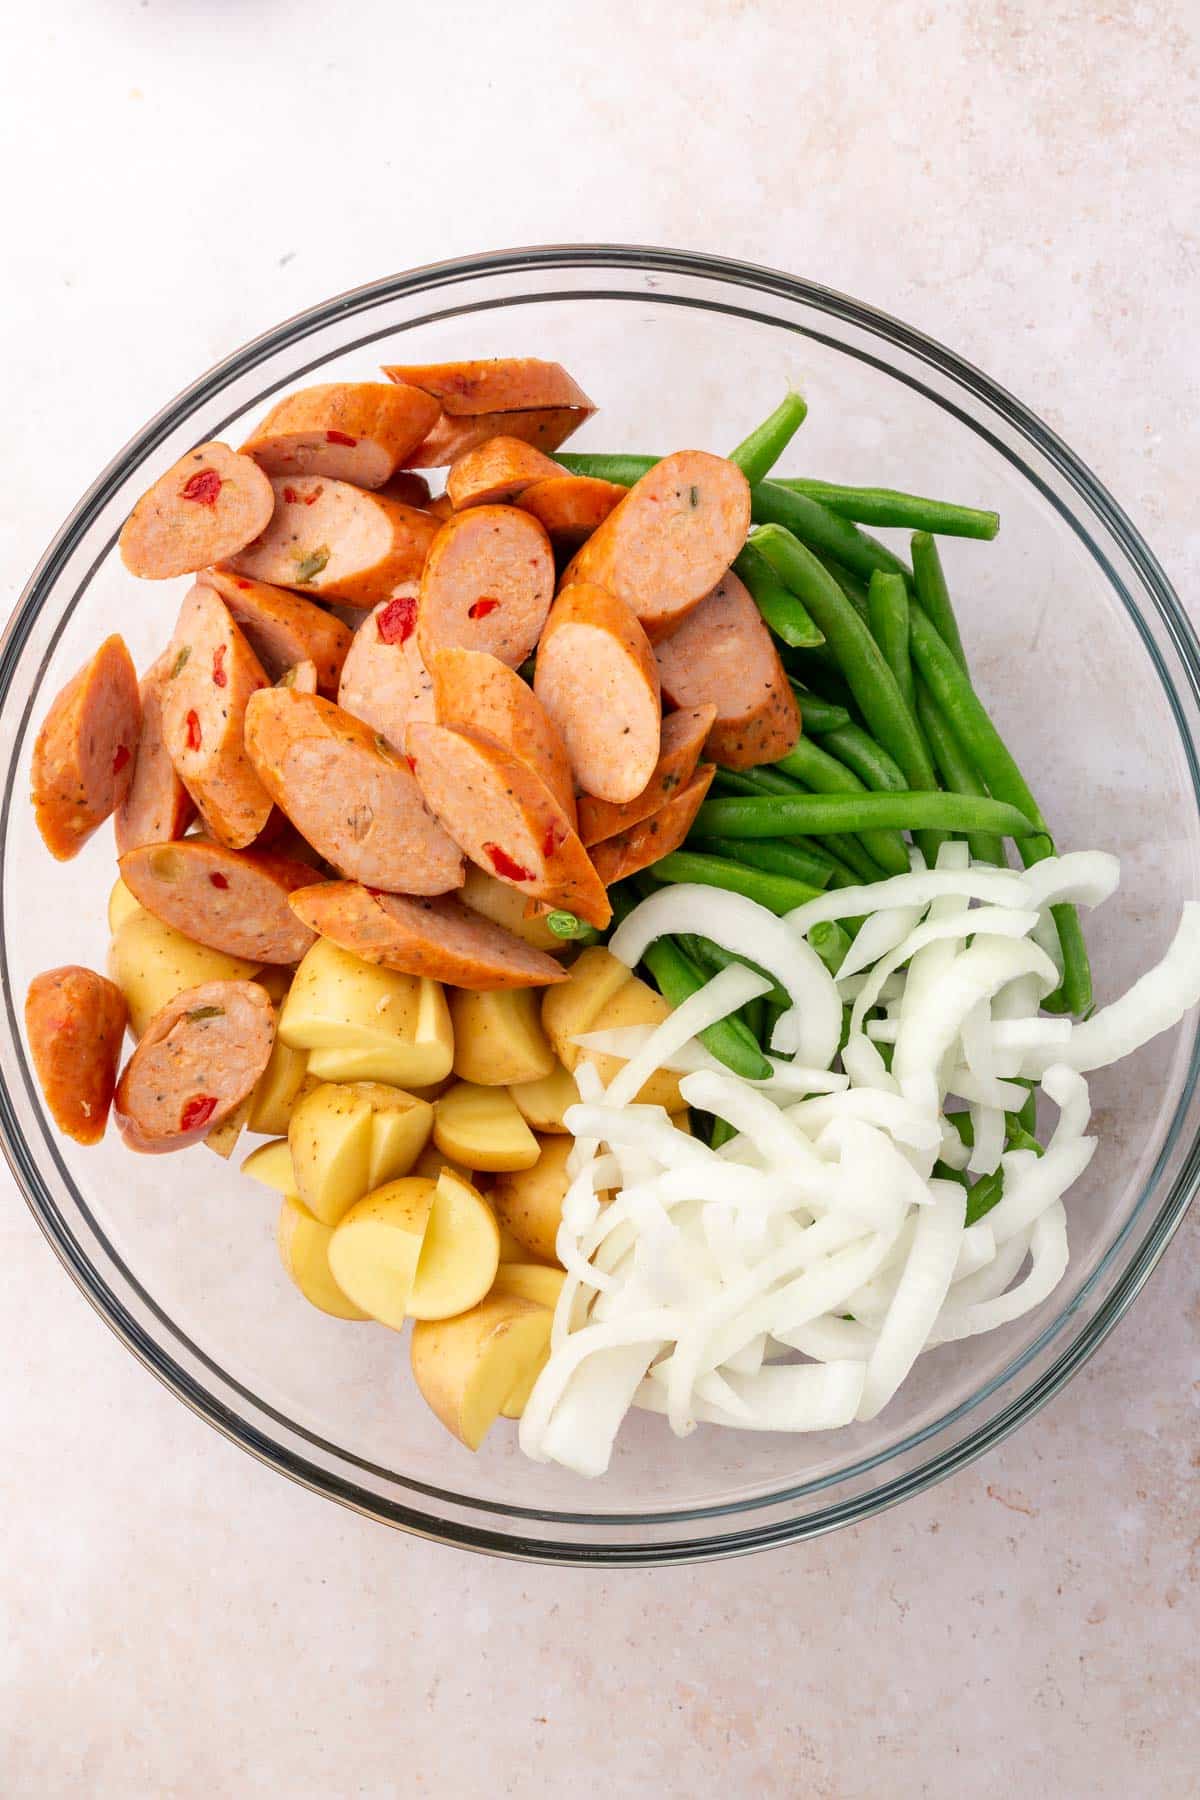 A glass mixing bowl of andouille sausage, green beans, yellow onions, and baby potatoes before mixing together.